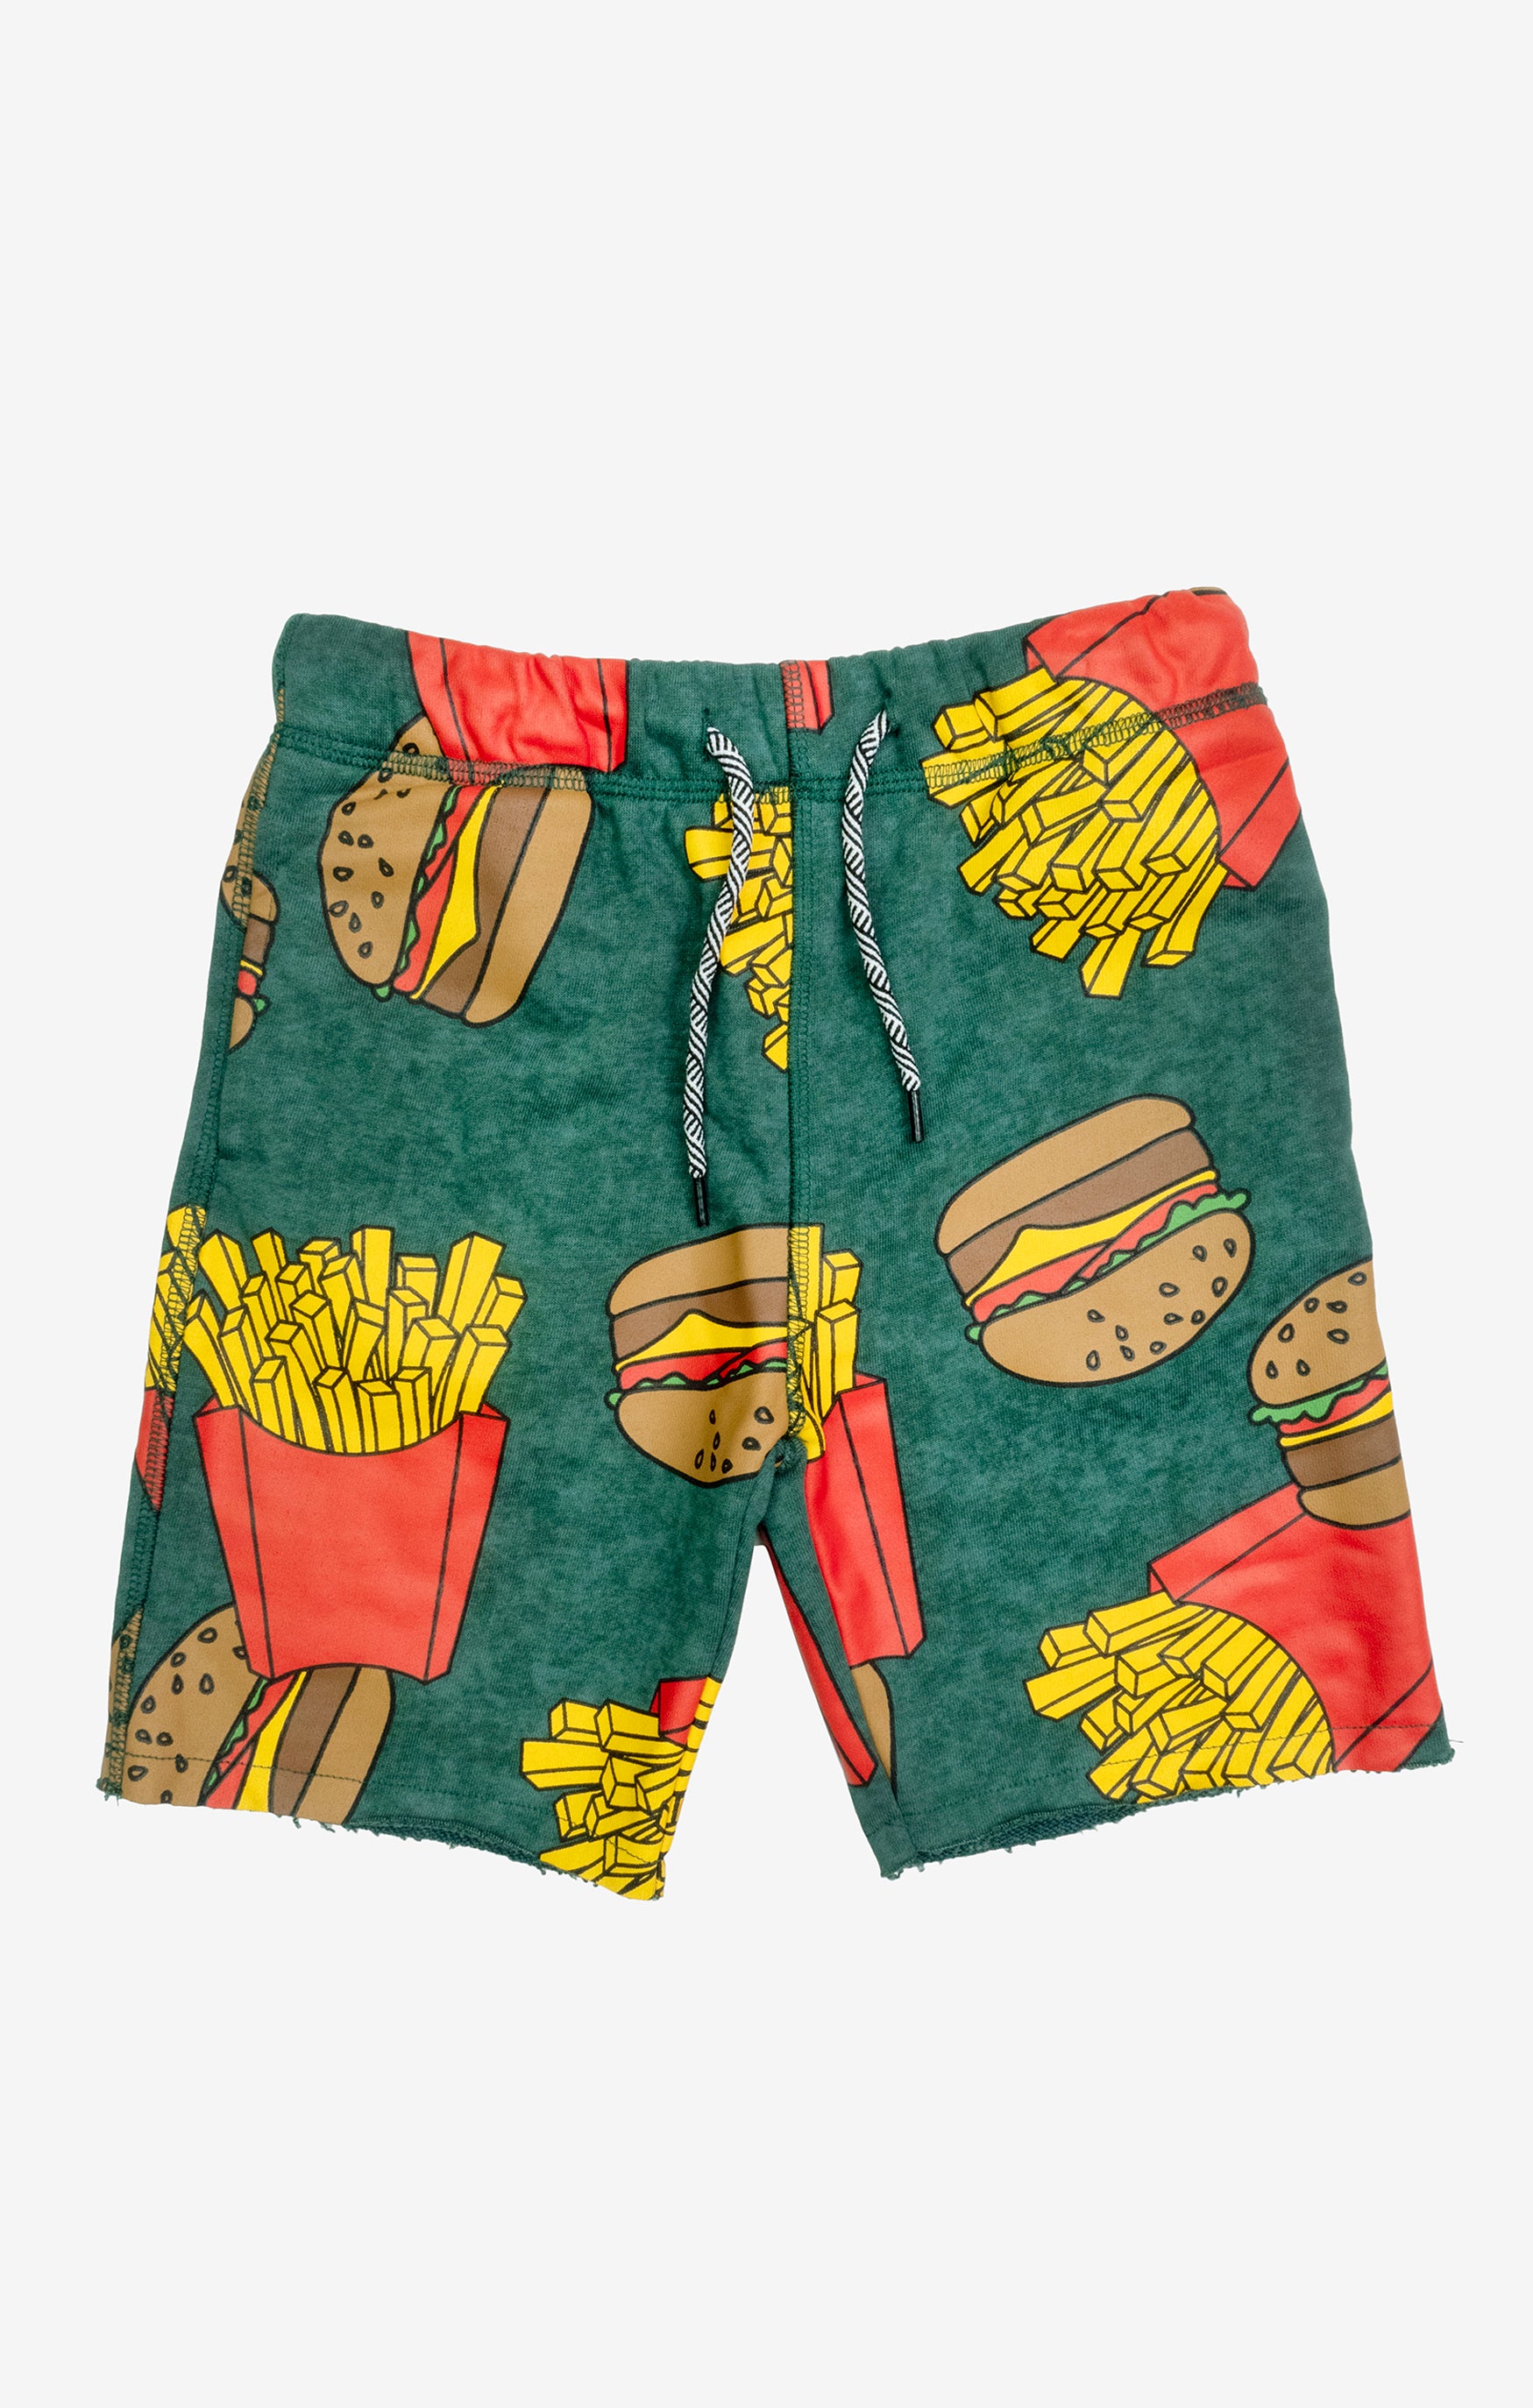 Camp Shorts - Burgers & Fries - Twinkle Twinkle Little One